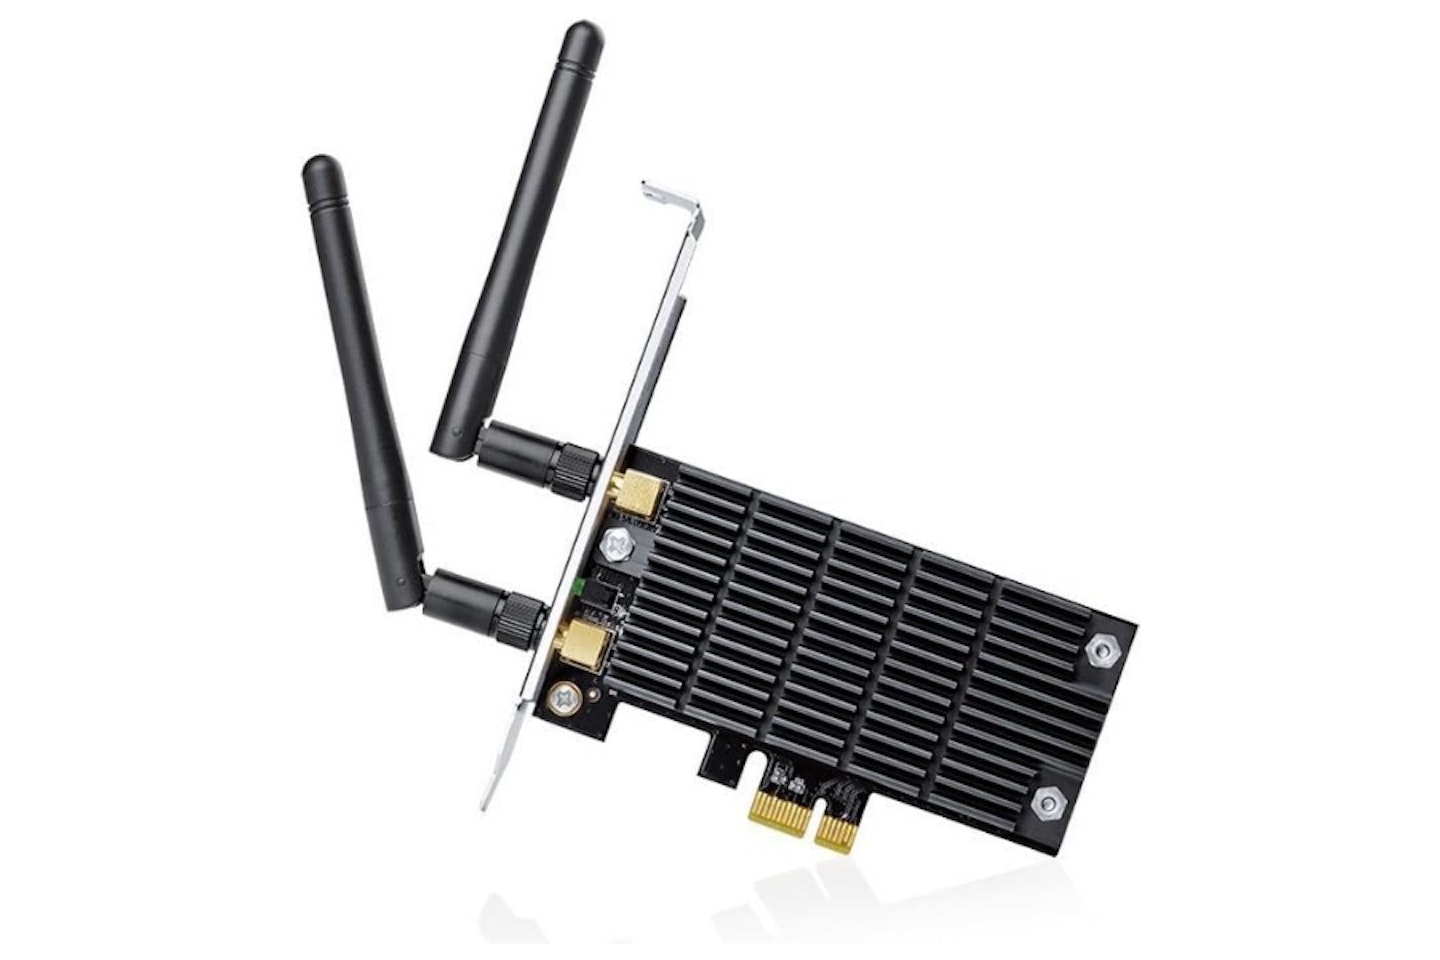 TP-Link AC1300 Wireless Dual Band PCI Express Wi-Fi Adapter  - possibly the best wifi card for gaming